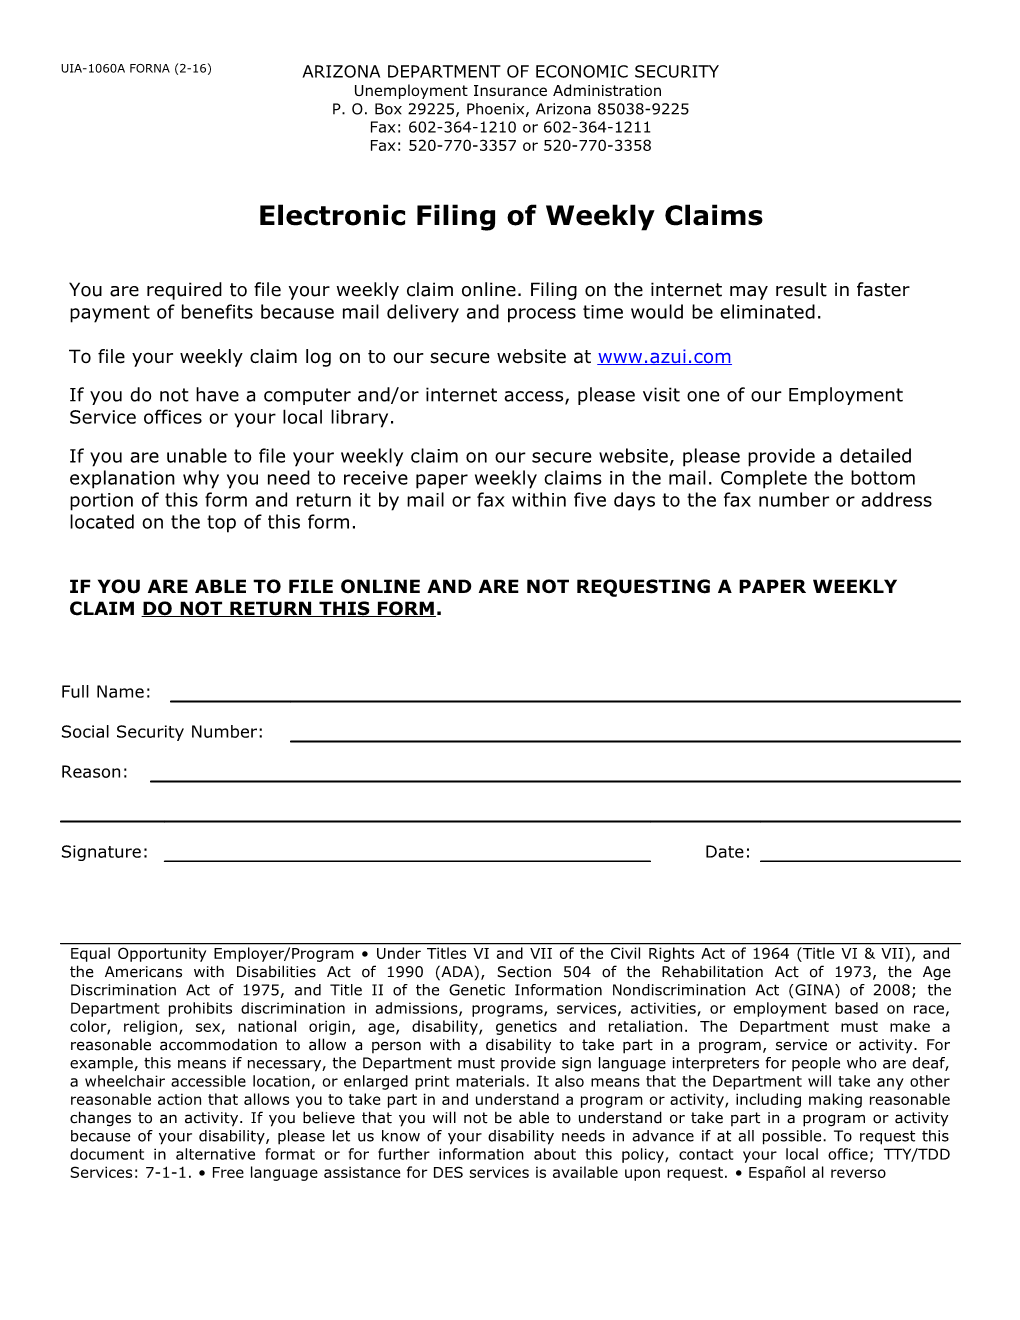 UIA-1060A - Electronic Filing of Weekly Claims